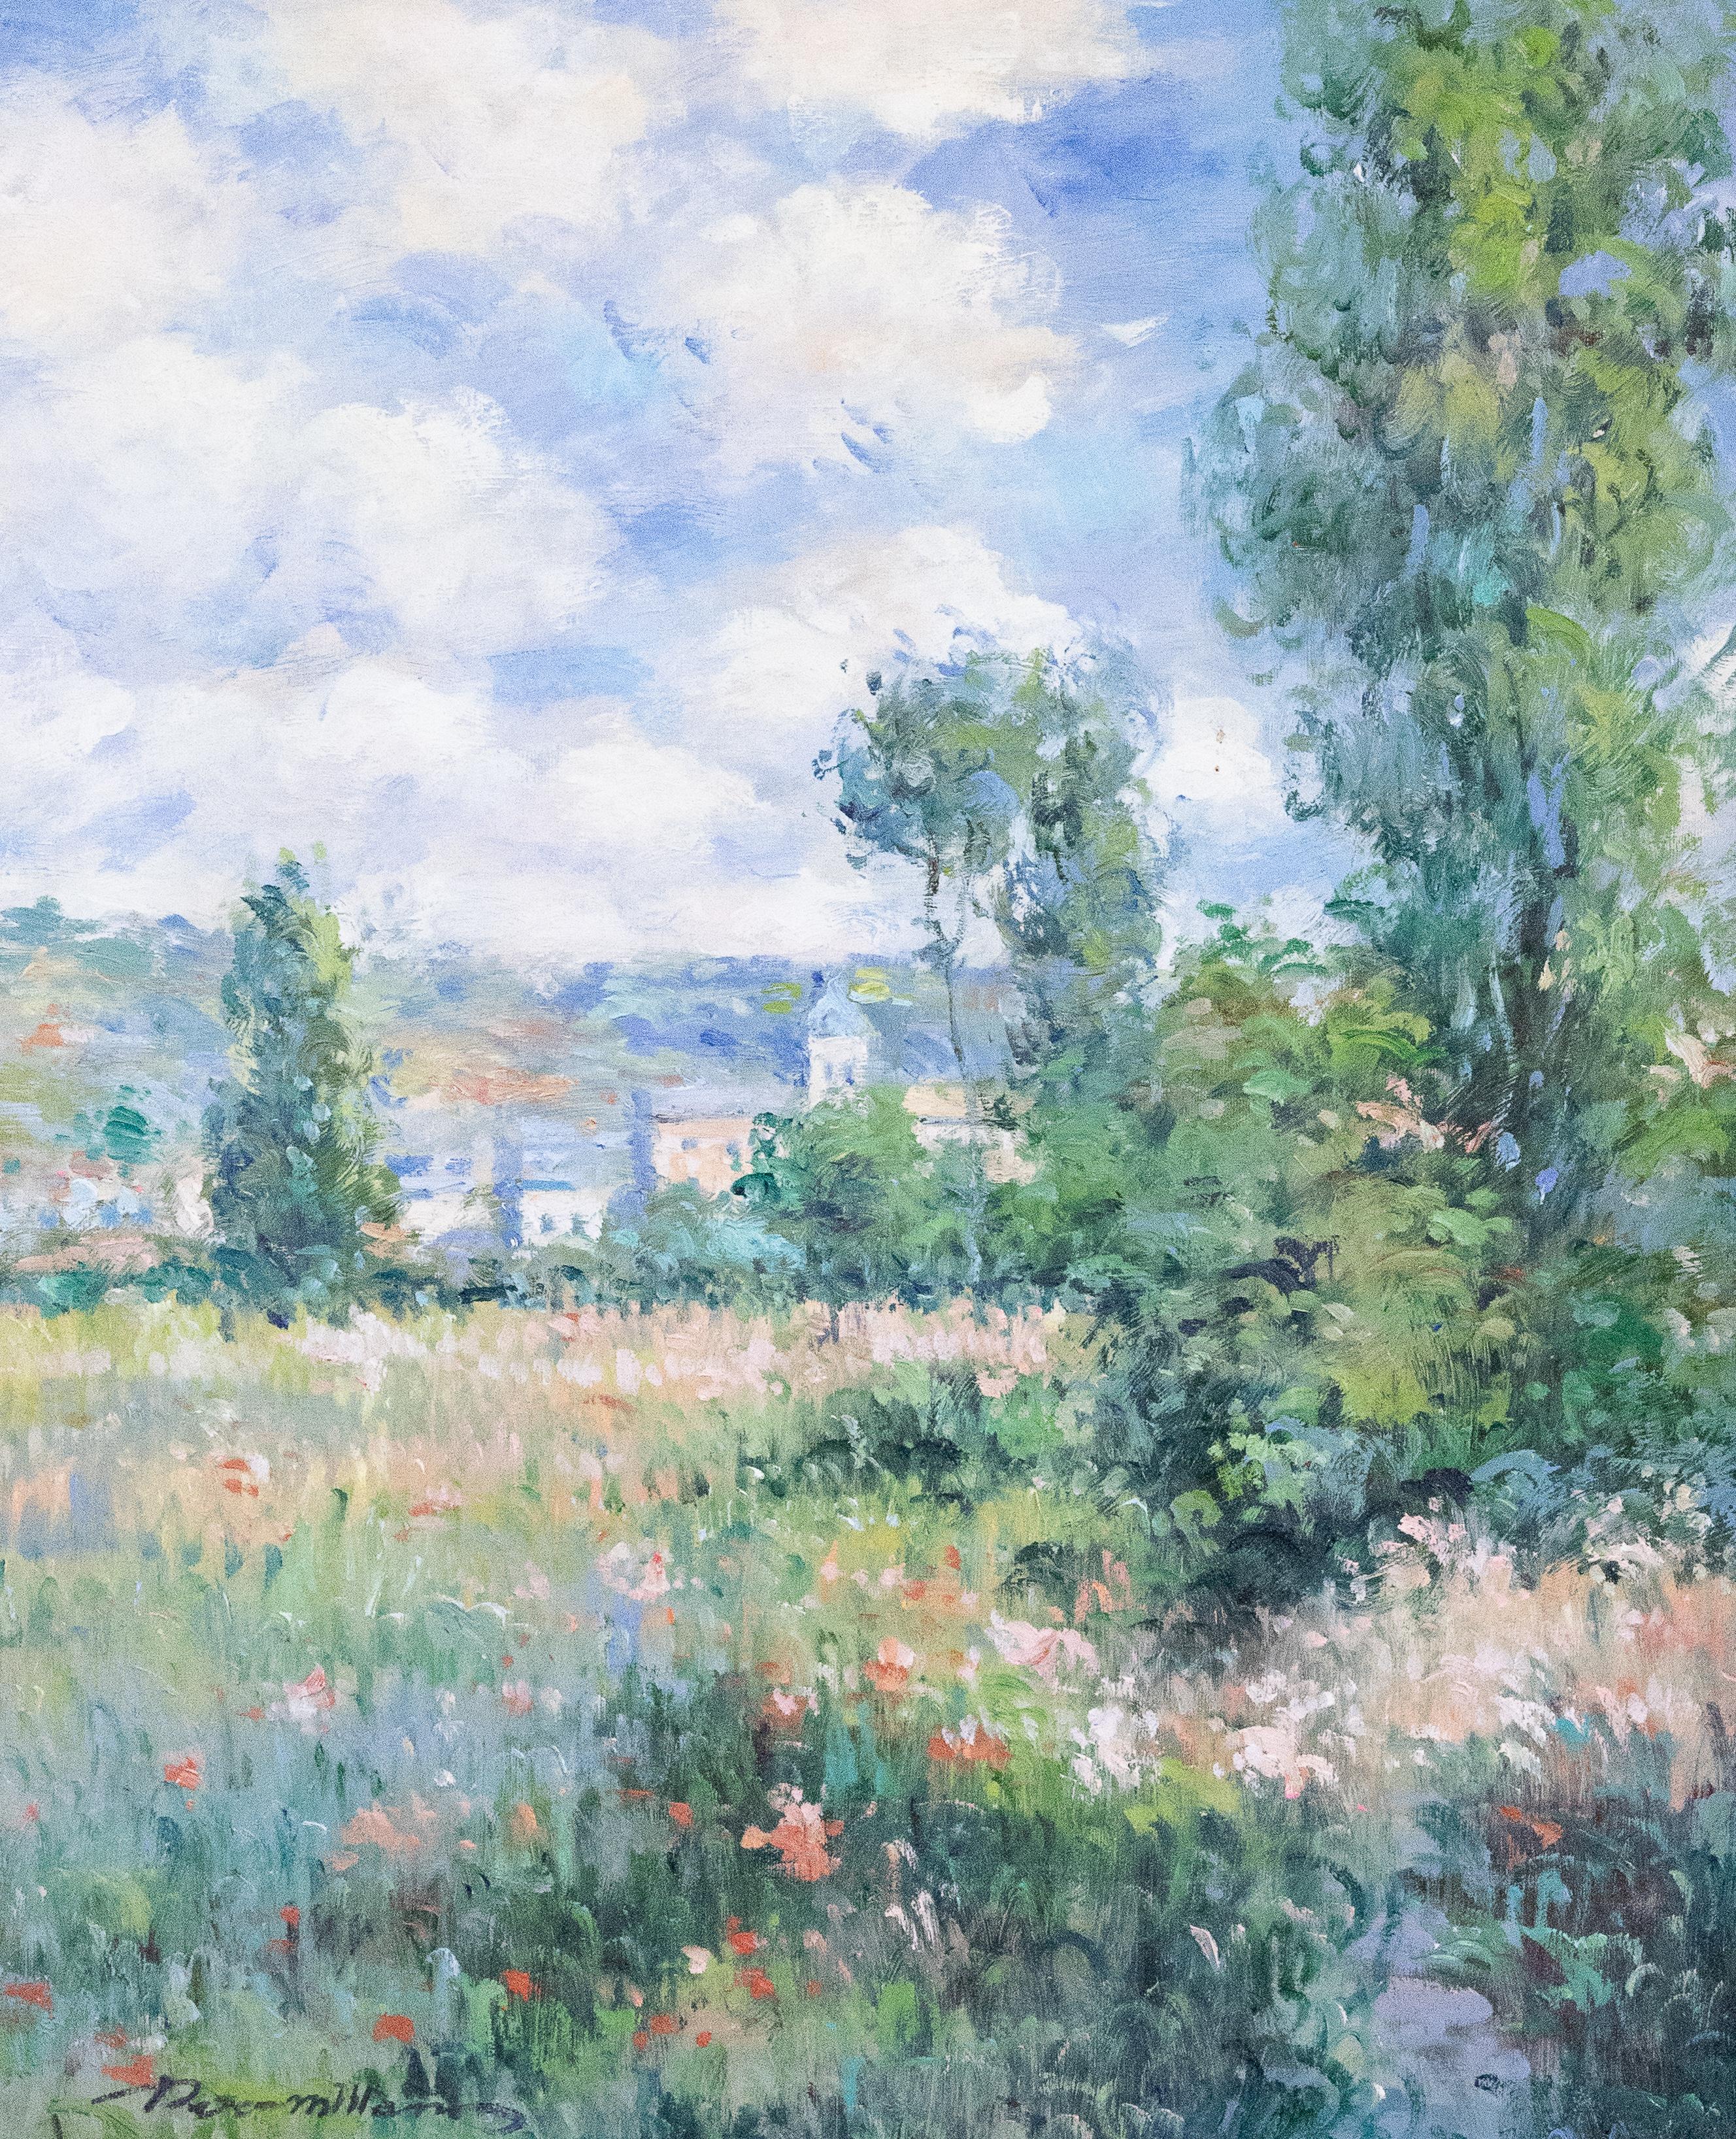 Lovely impressionist landscape featuring a spring field awash in pastel flowers. Village buildings In the distance, blue skies filled with billowy clouds. Signed by artist in lower left. Presented in gilt period frame, ready to hang.

Dimensions: